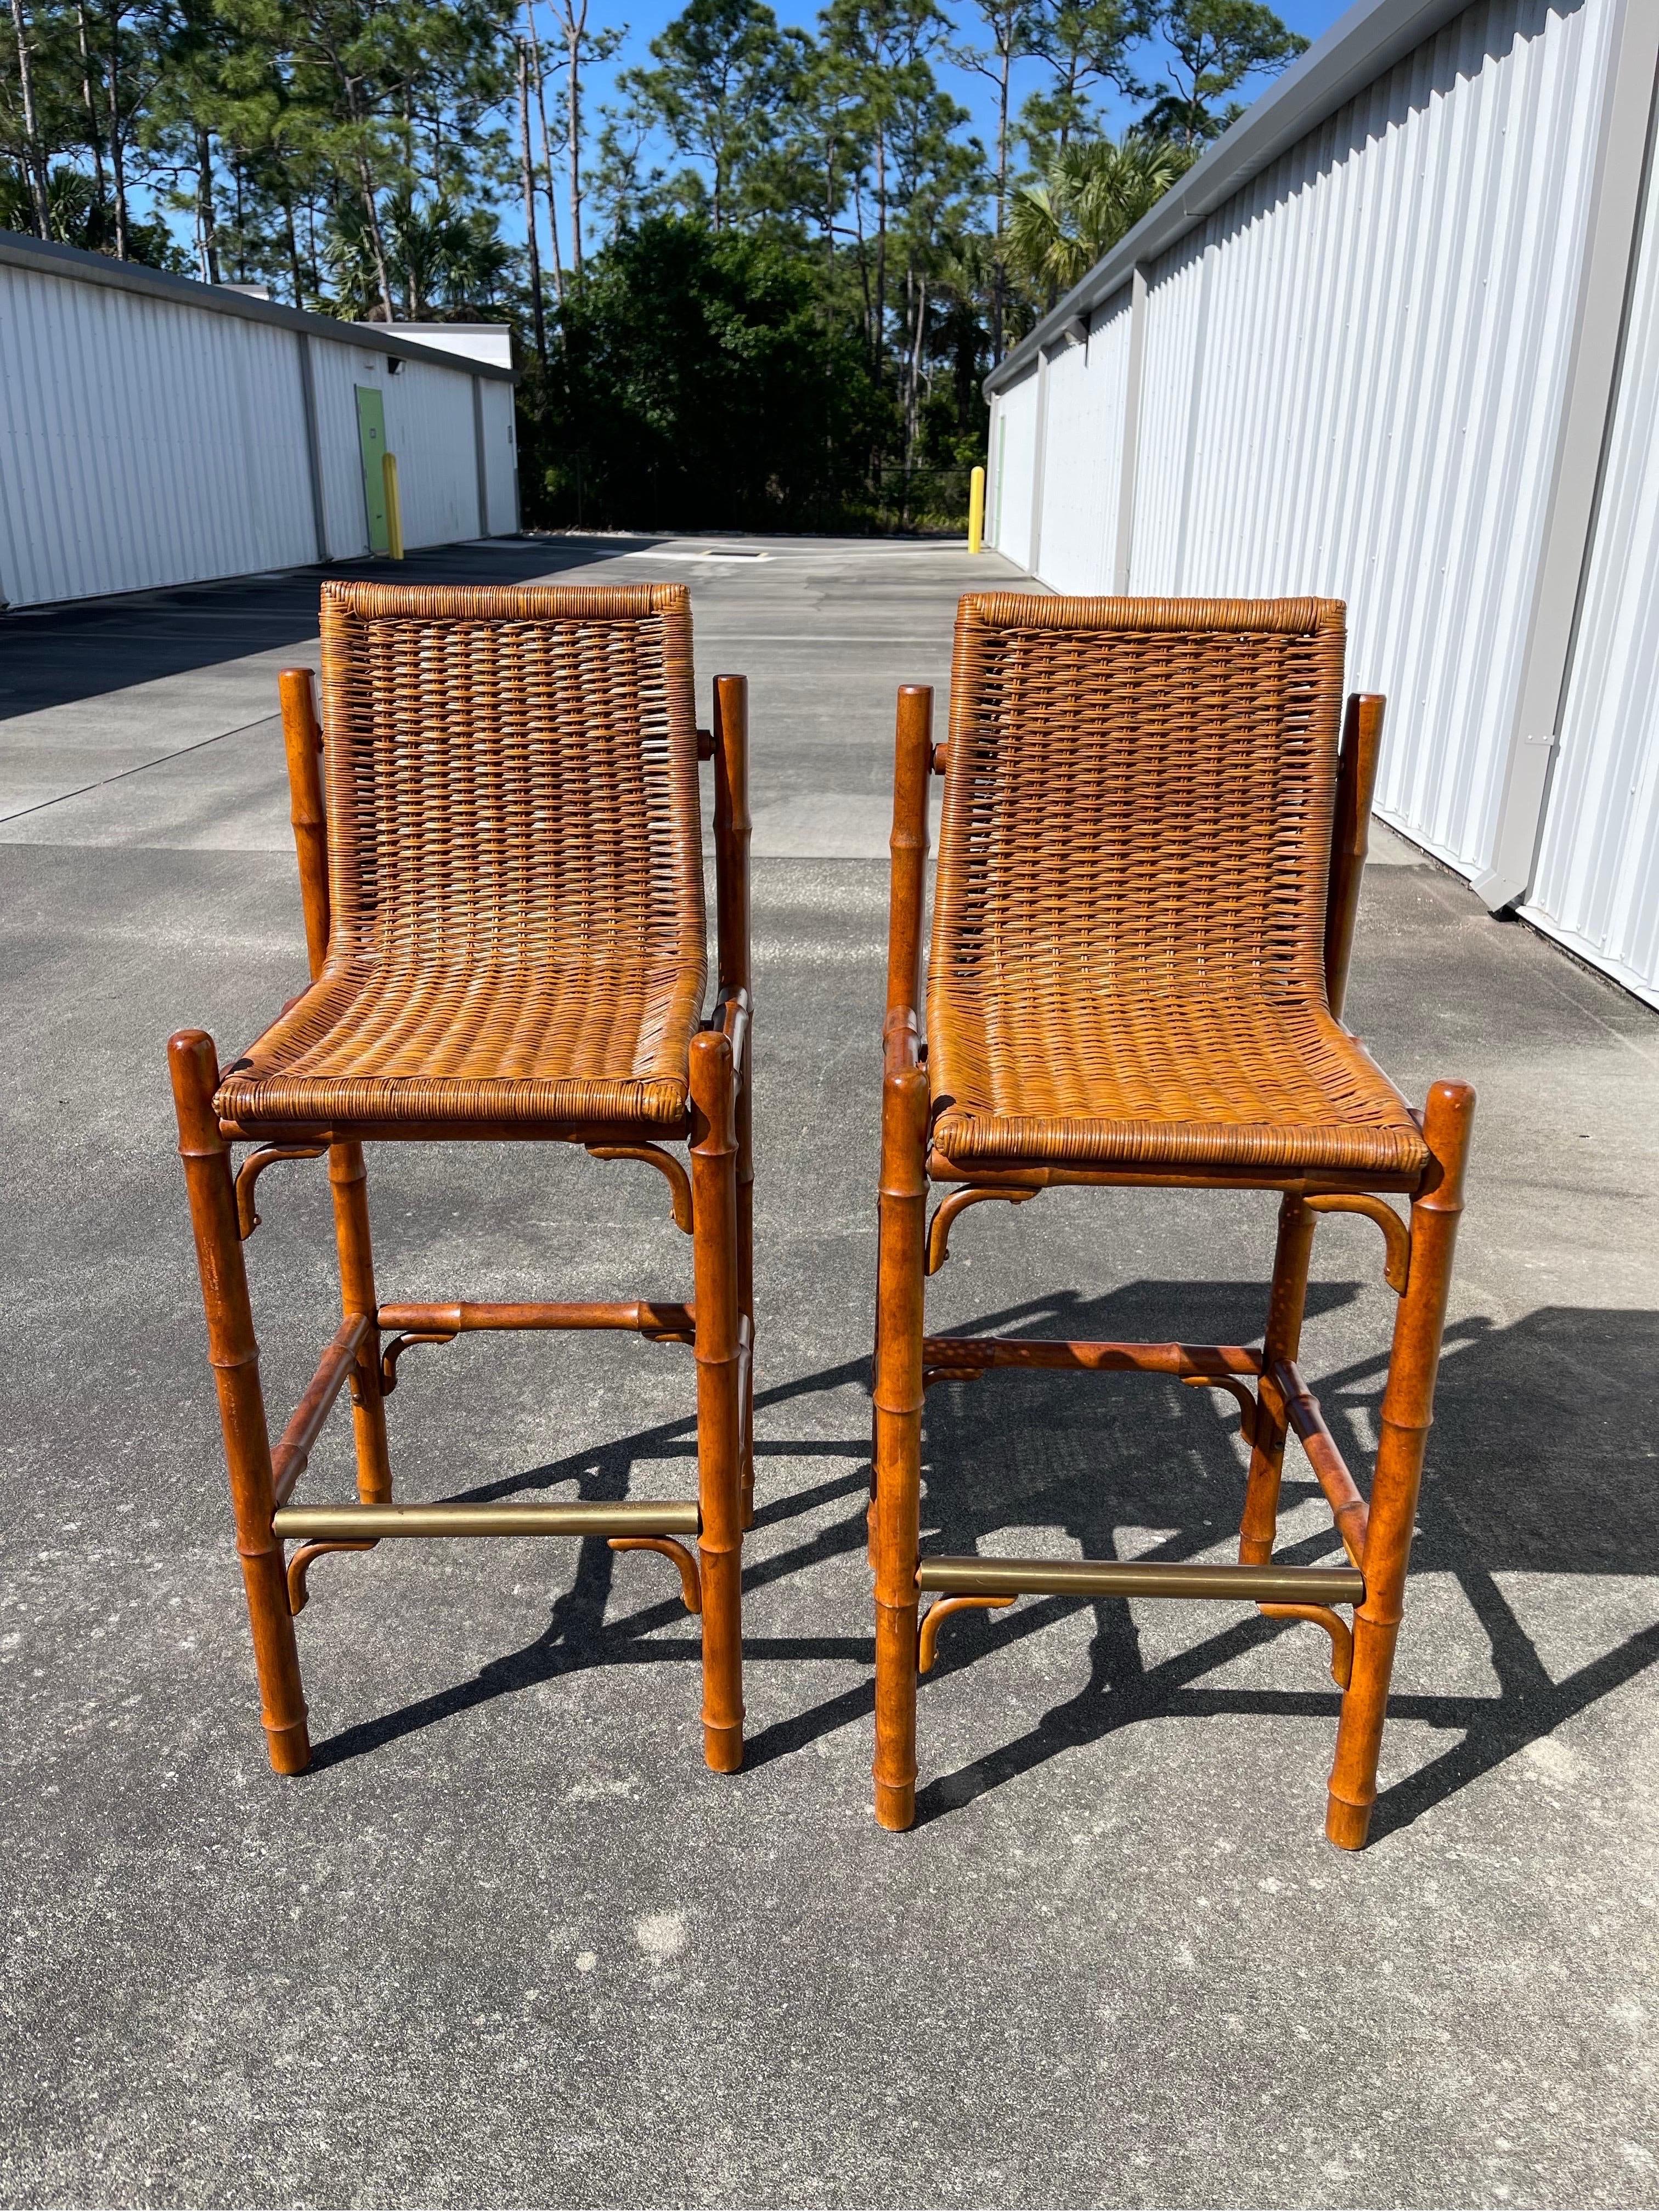 Unusual pair of faux bamboo barstools with floating seats made of woven wicker.


Third stool is available but damaged. Cane seat has multiple breaks. I am 170lbs and it holds me without a problem. I will include this third stool if buyer requests,